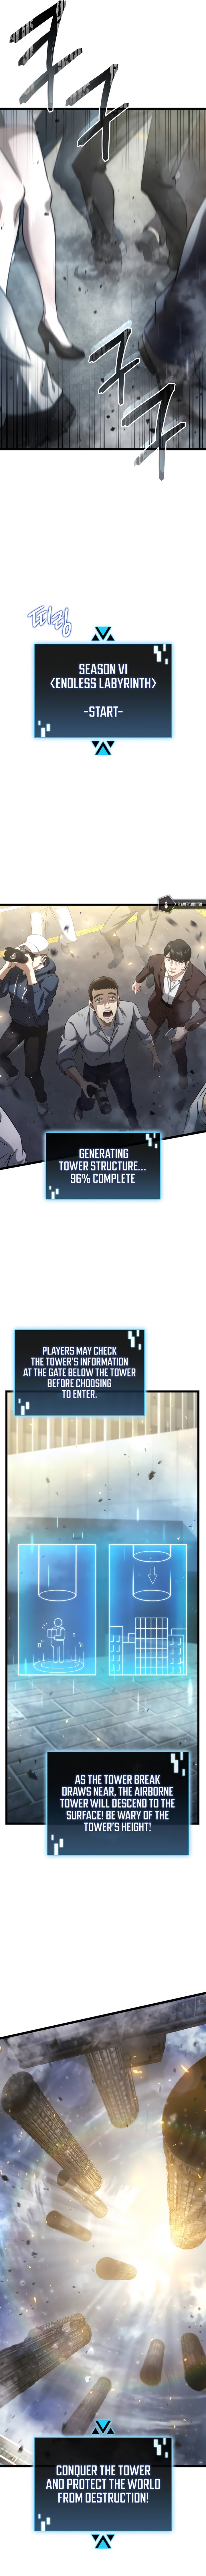 Insanely Talented Player Chapter 2 Page 9